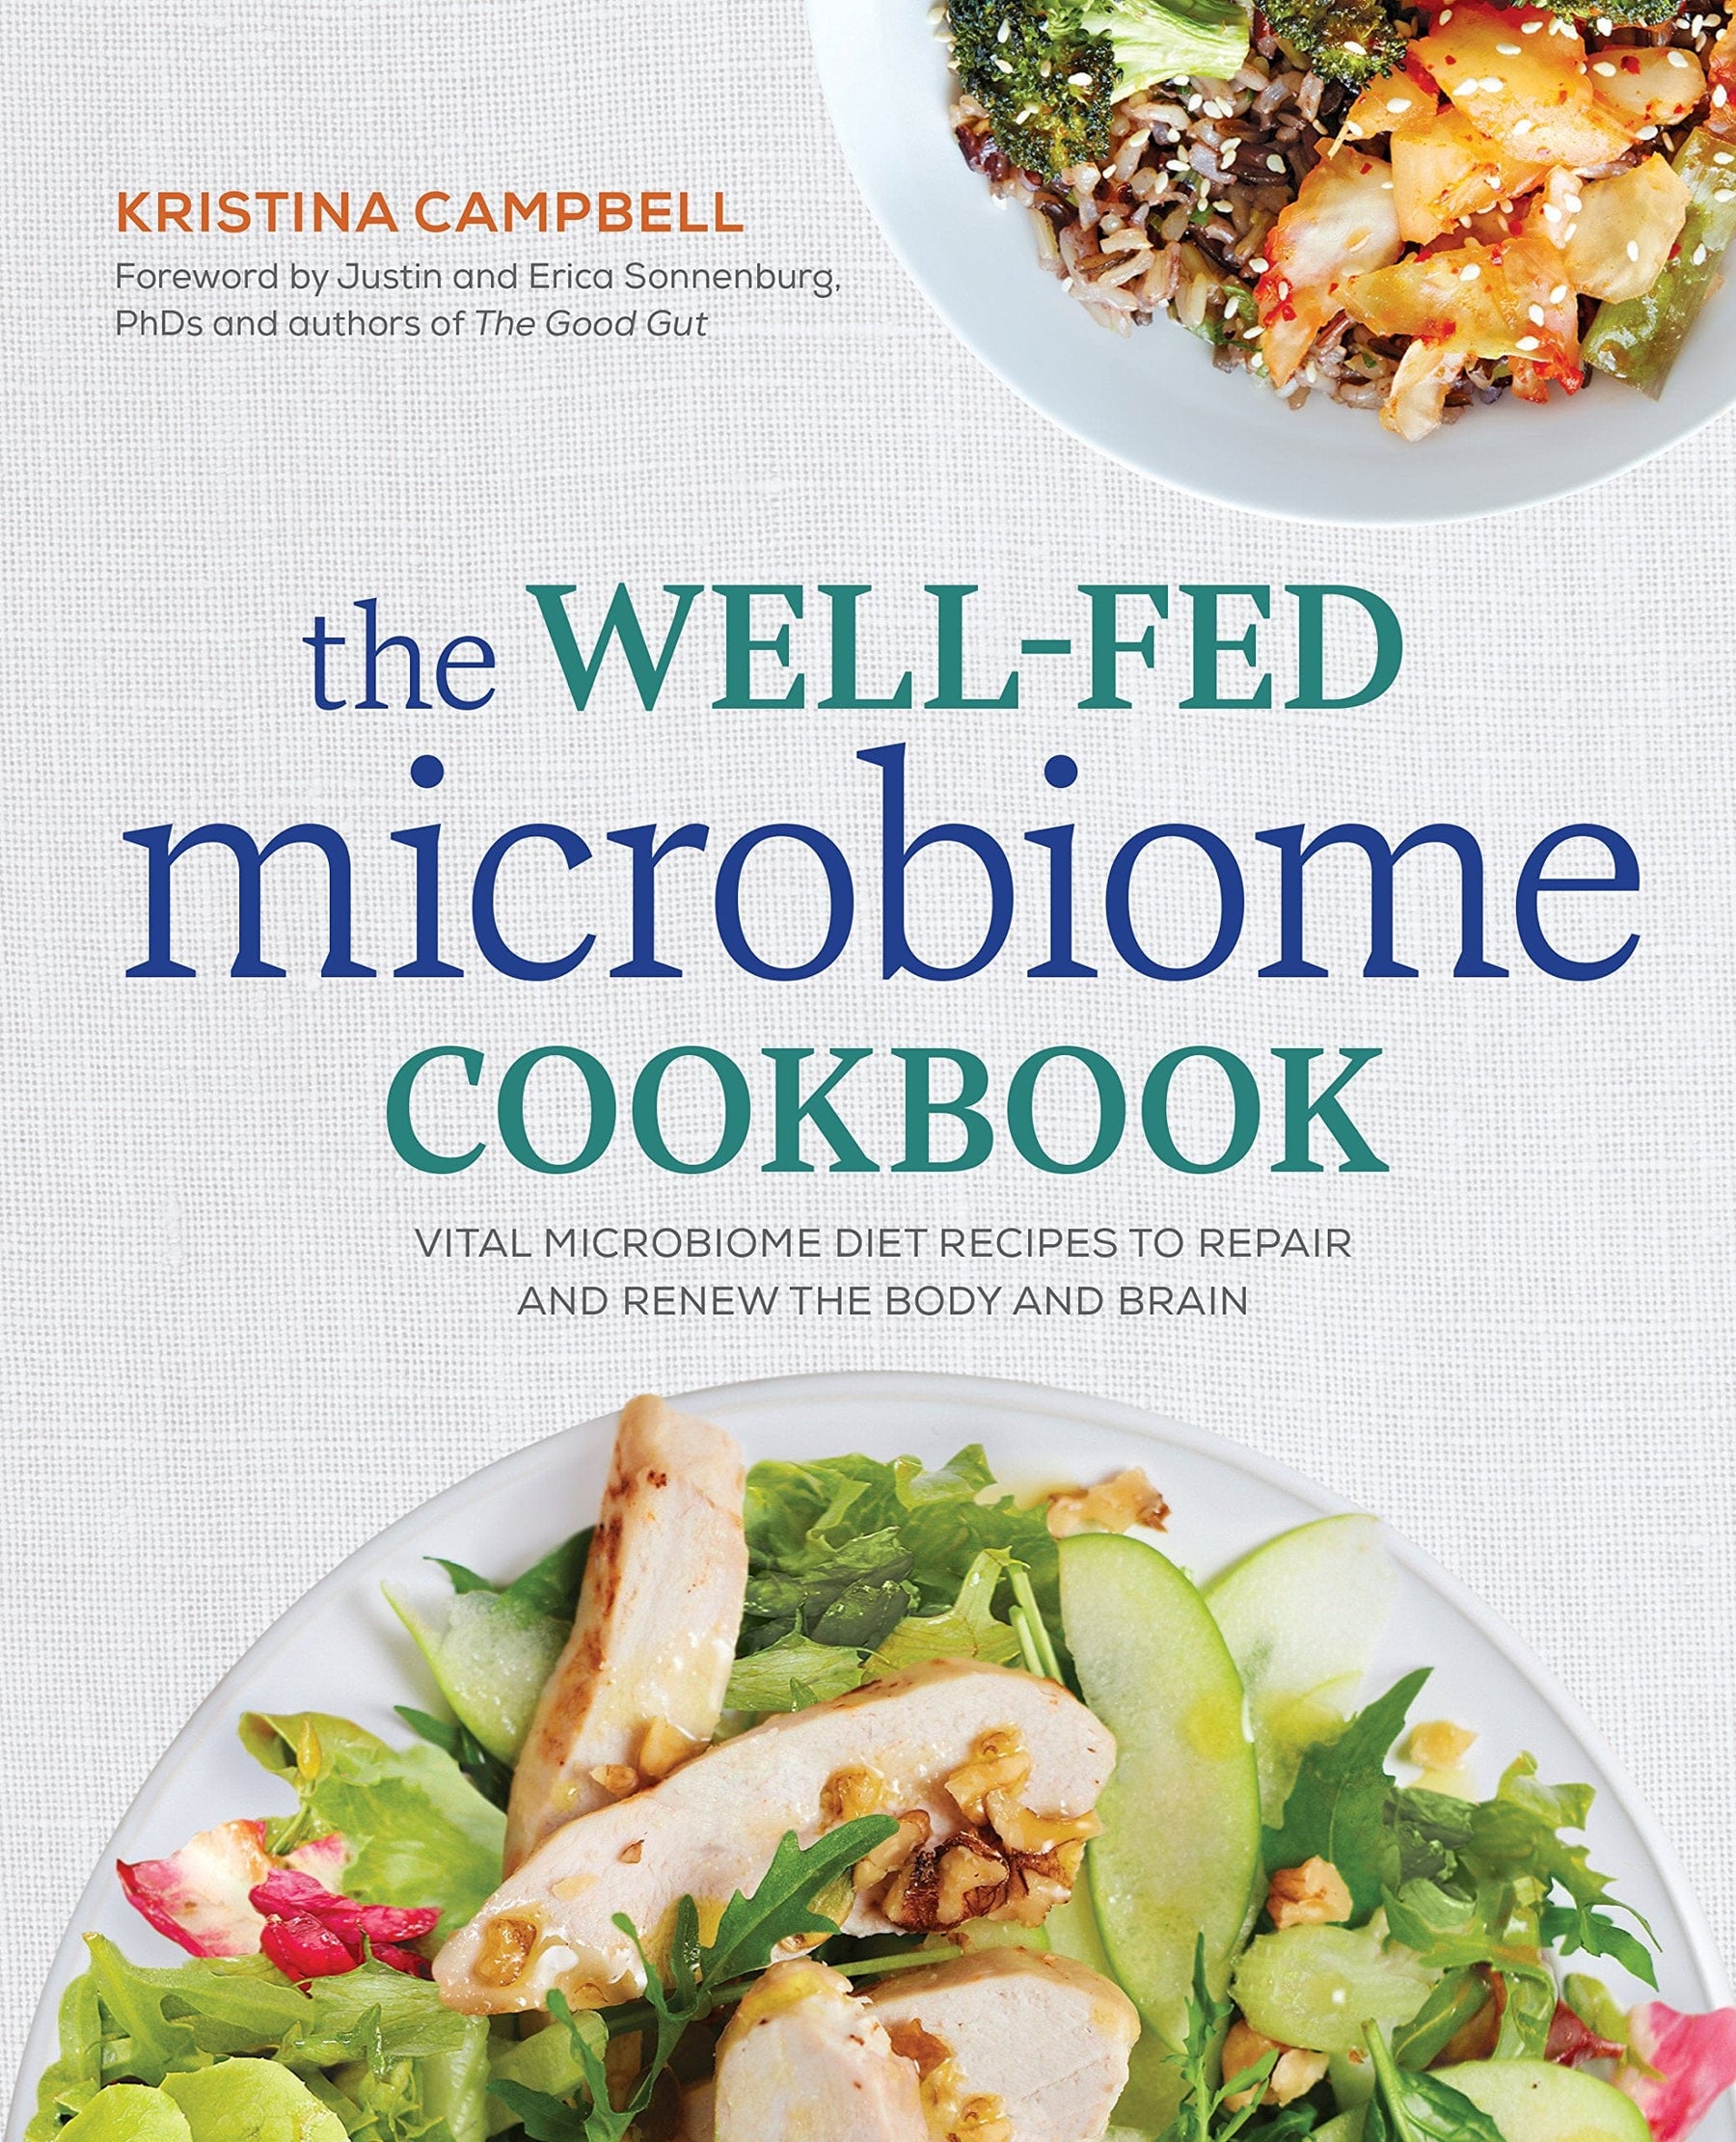 Well-Fed Microbiome Cookbook: Vital Microbiome Diet Recipes to Repair and Renew the Body and Brain - Third Eye